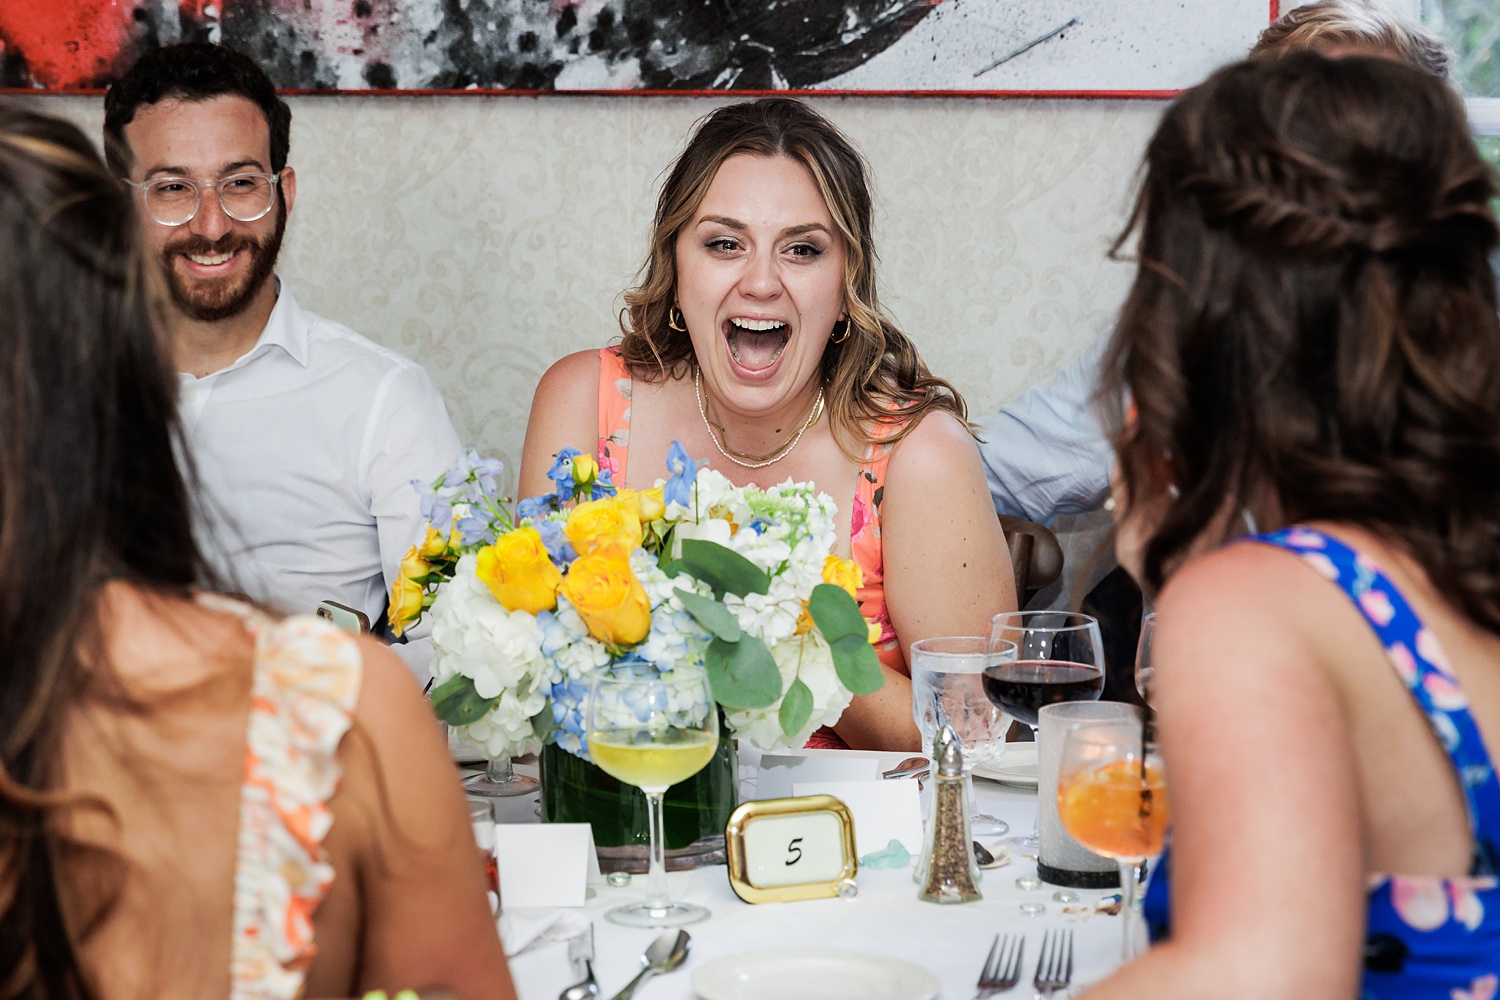 Friends laugh and tear up at the wedding day toasts